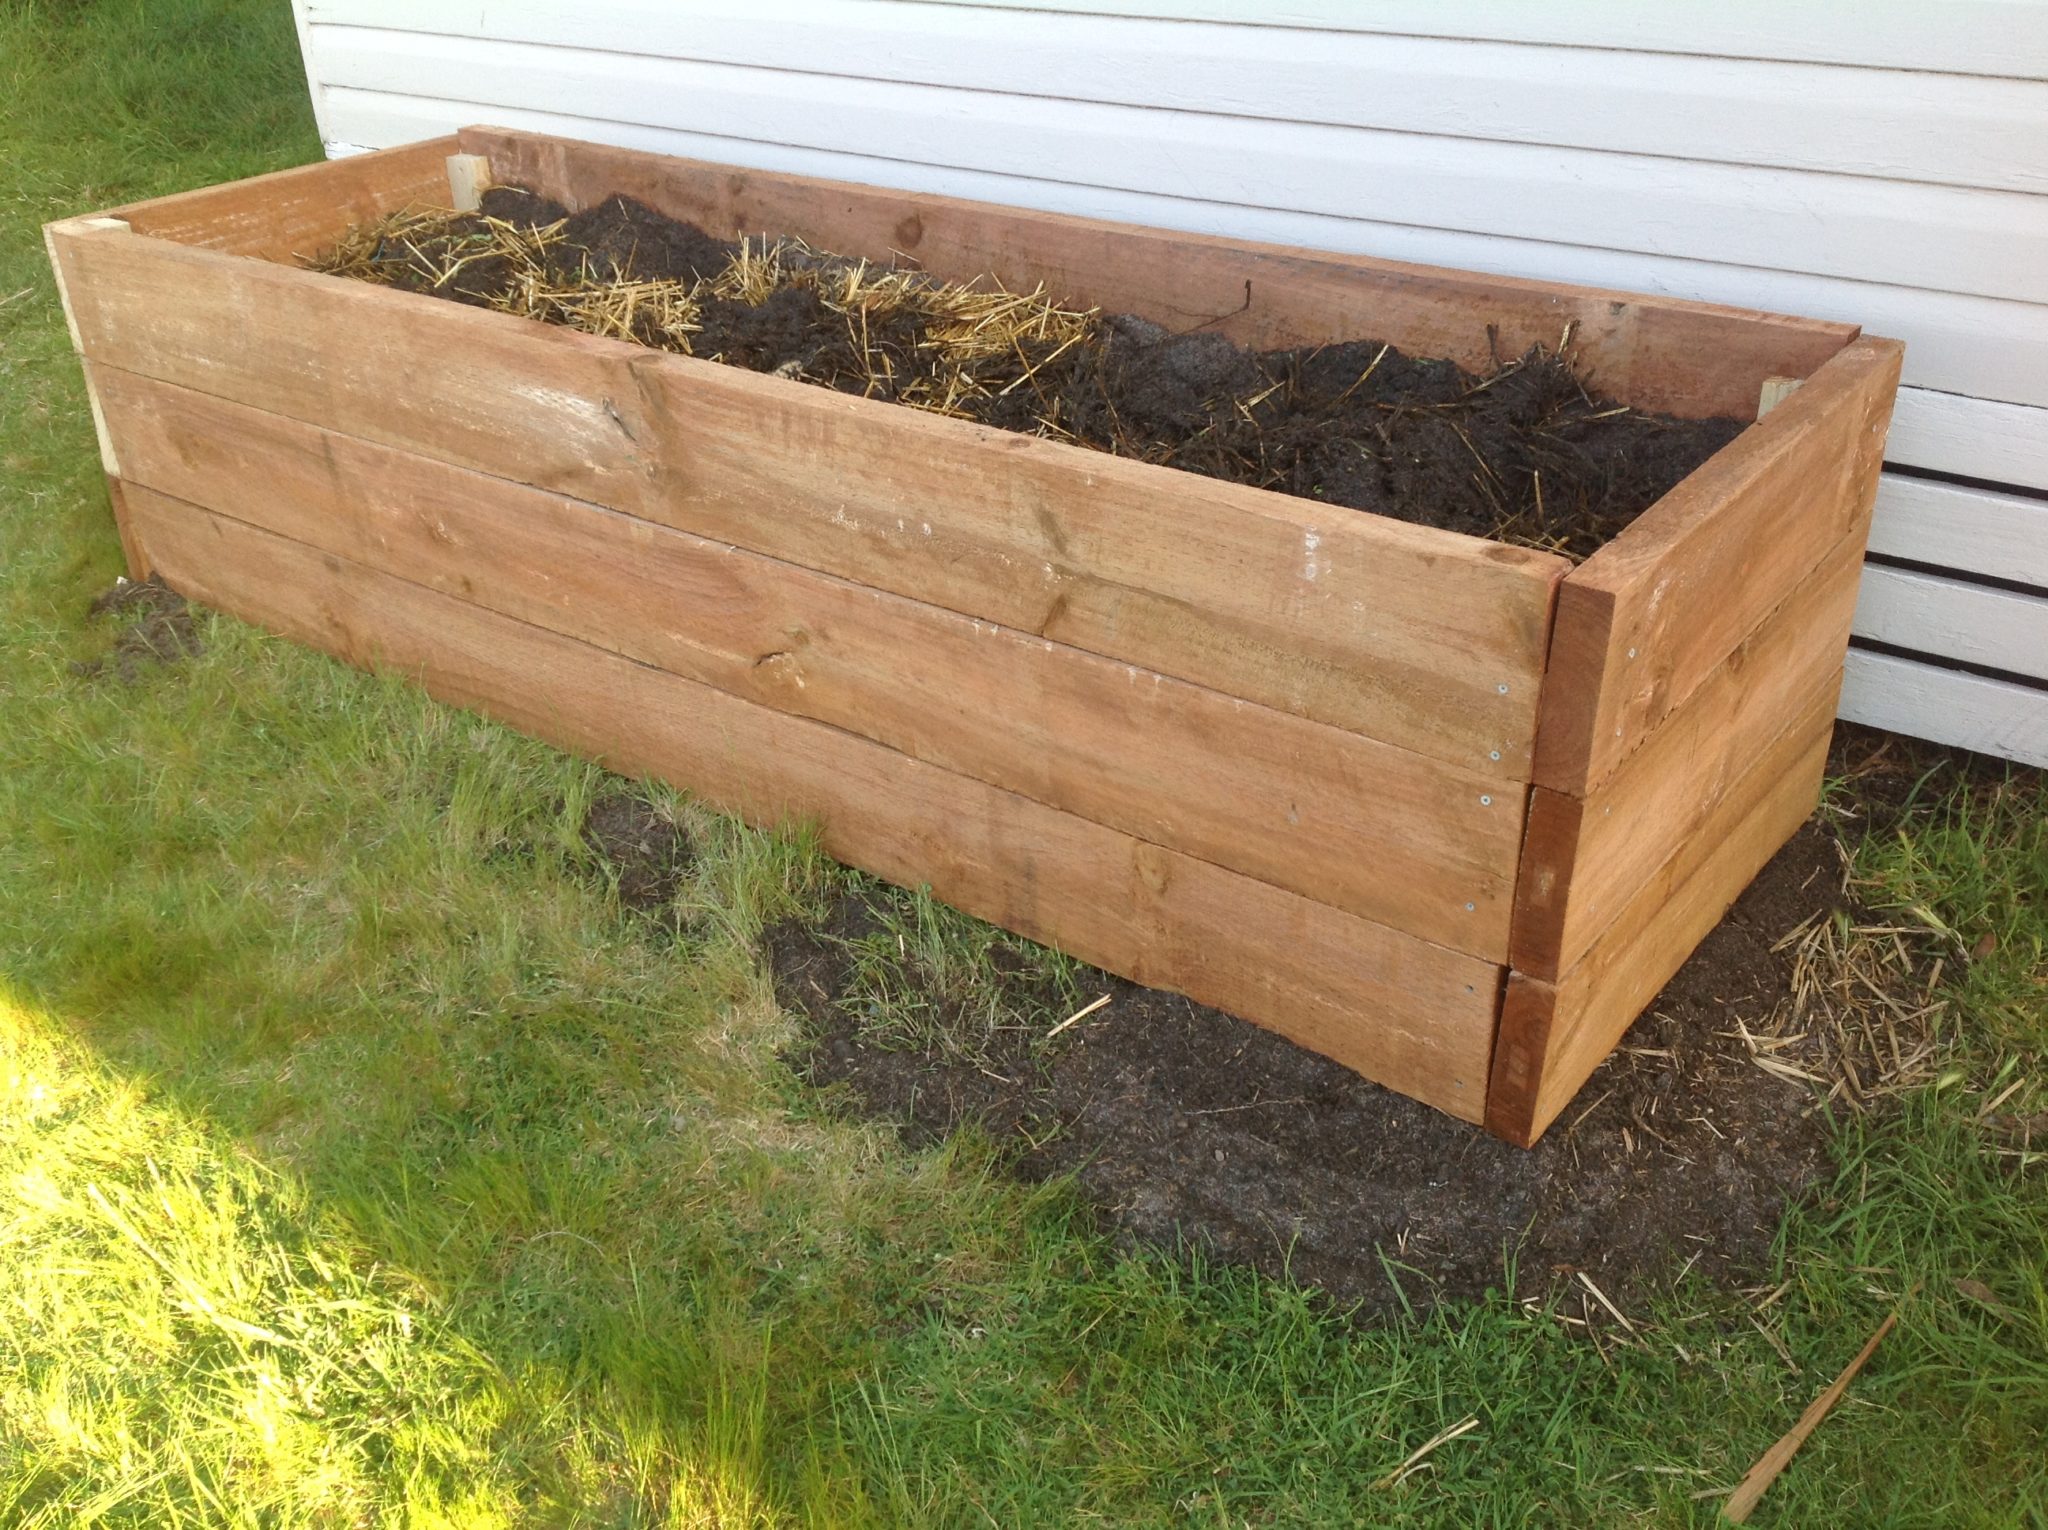 completed raised garden bed